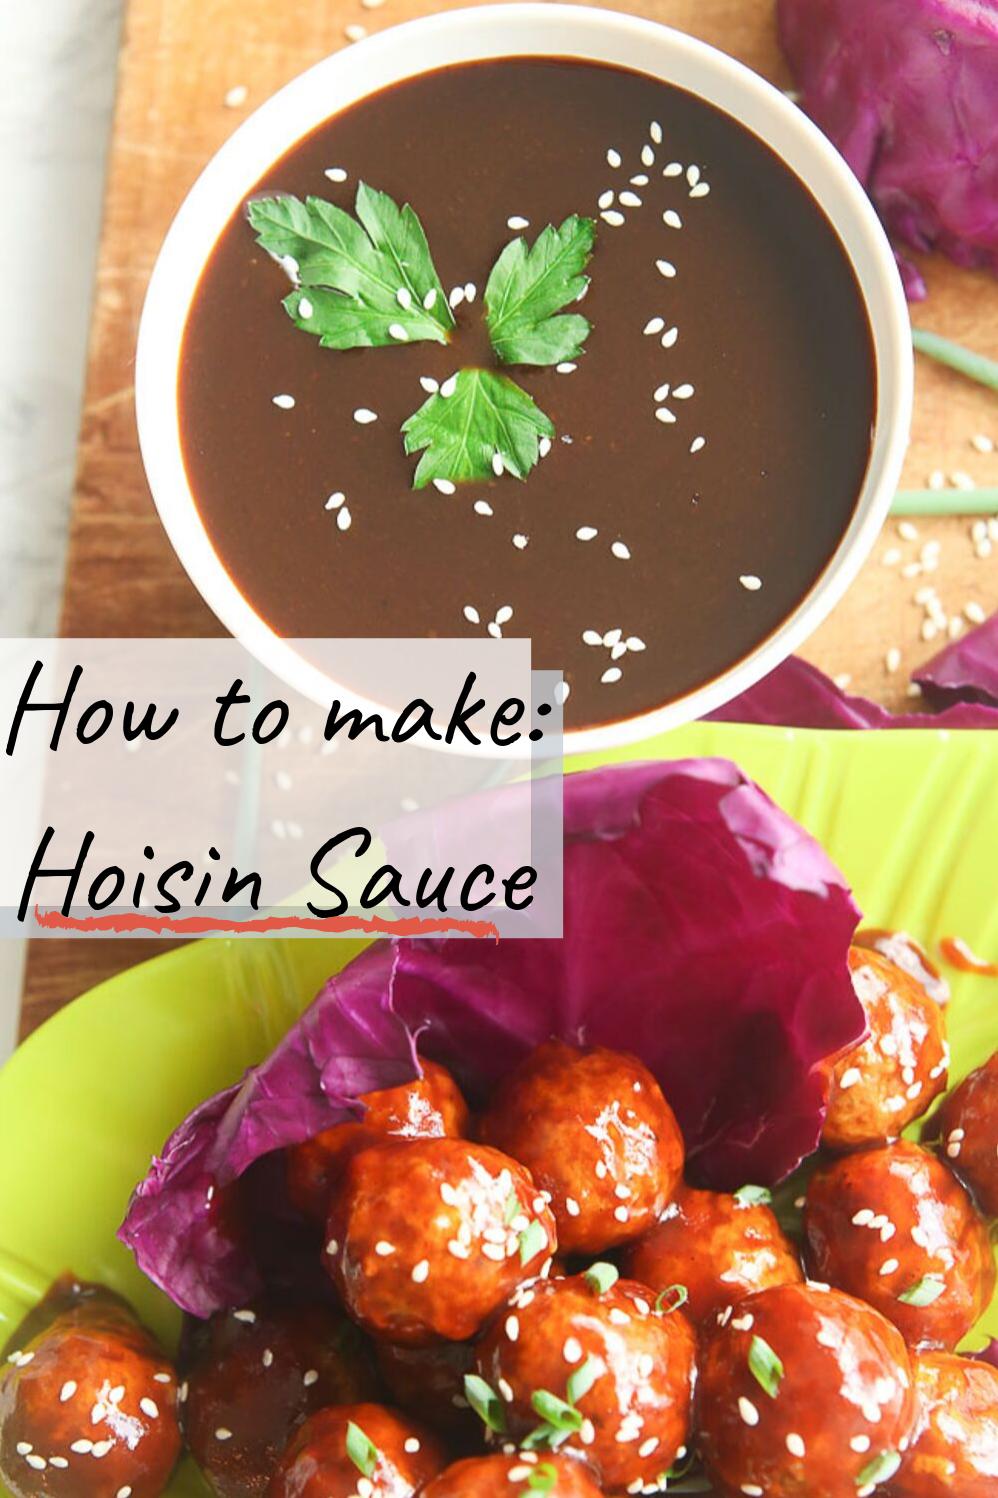  No need for a trip to the grocery store- make your own hoisin sauce with ingredients you already have on hand.